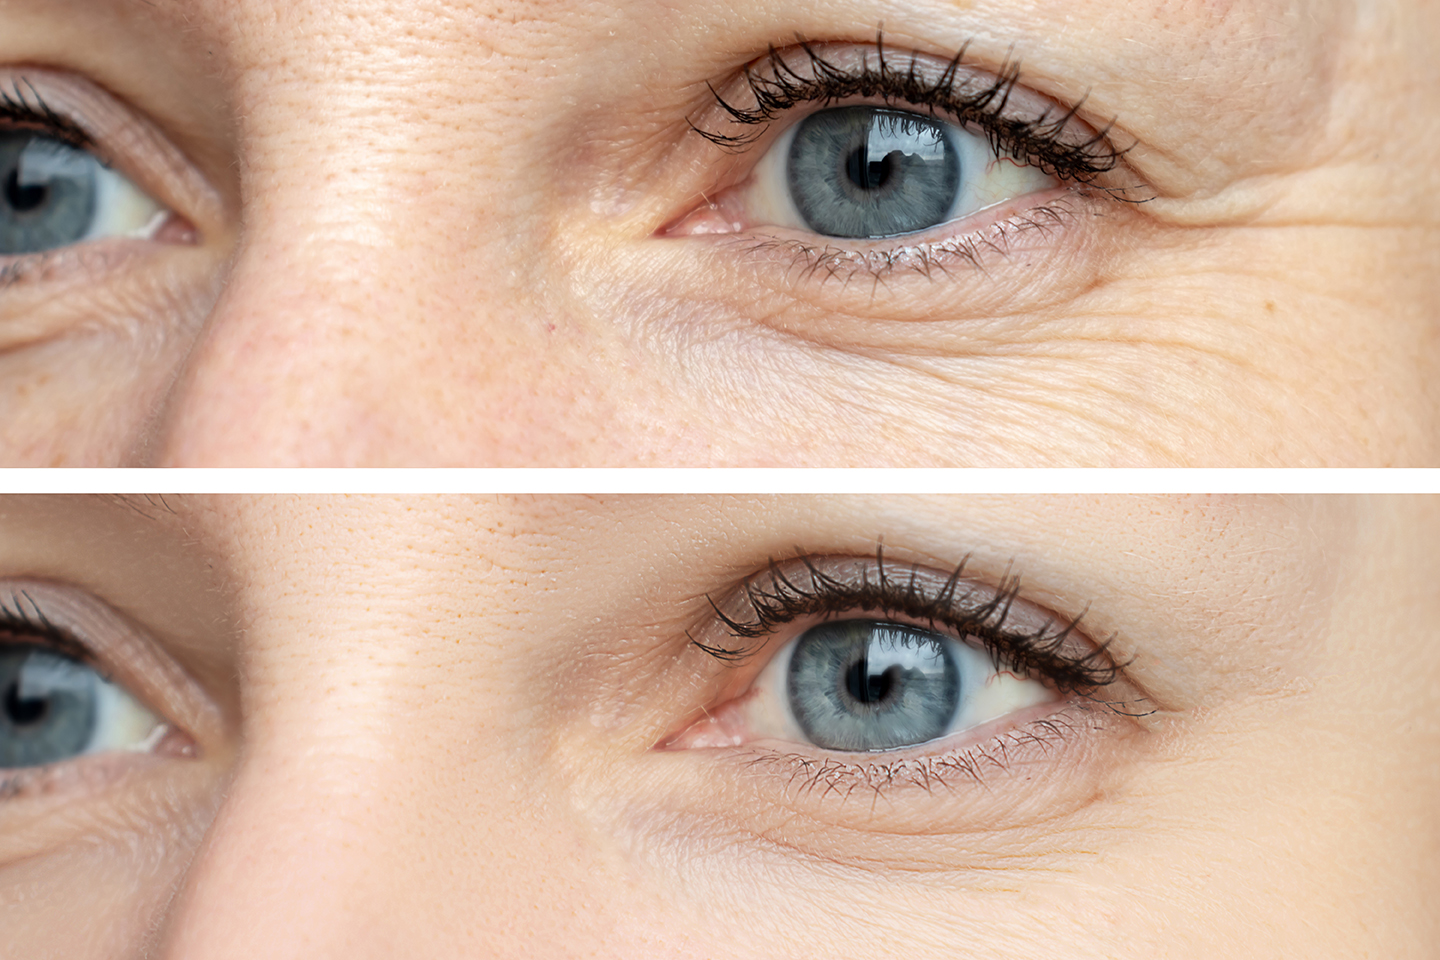 Can BOTOX® at an Early Age Help Prevent Future Wrinkles?